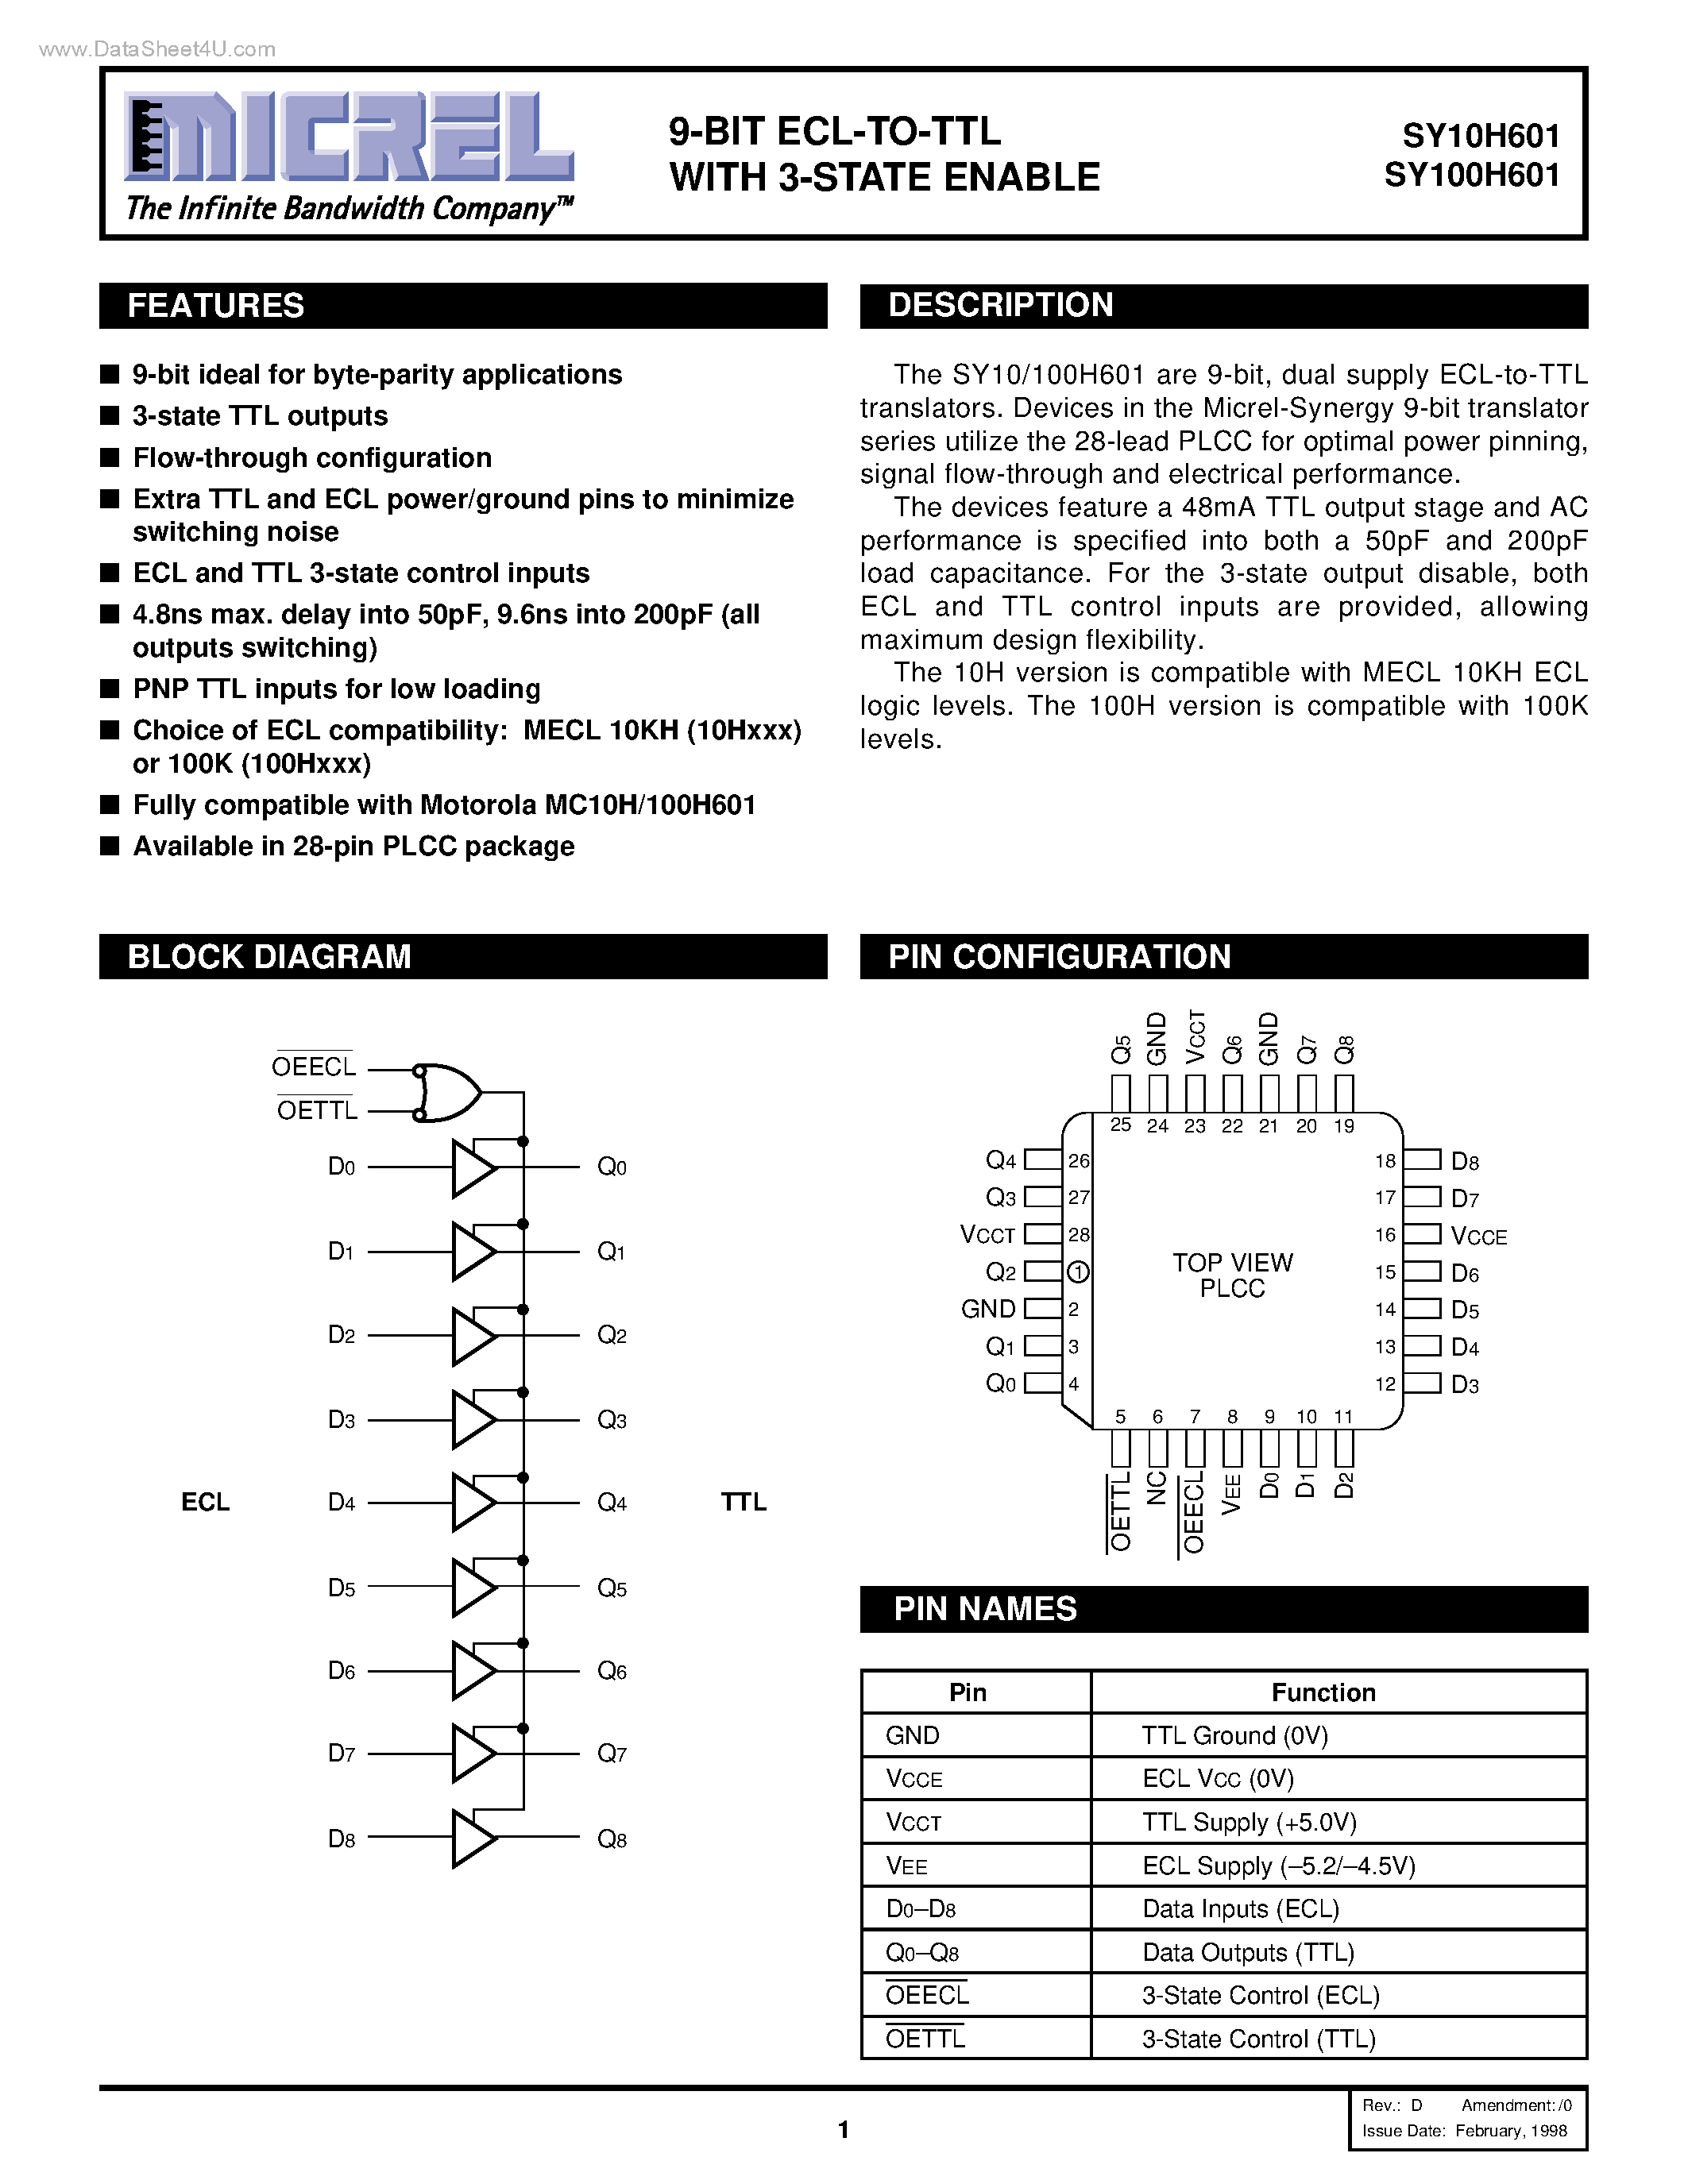 Datasheet SY100H601 - 9-BIT ECL-TO-TTL page 1